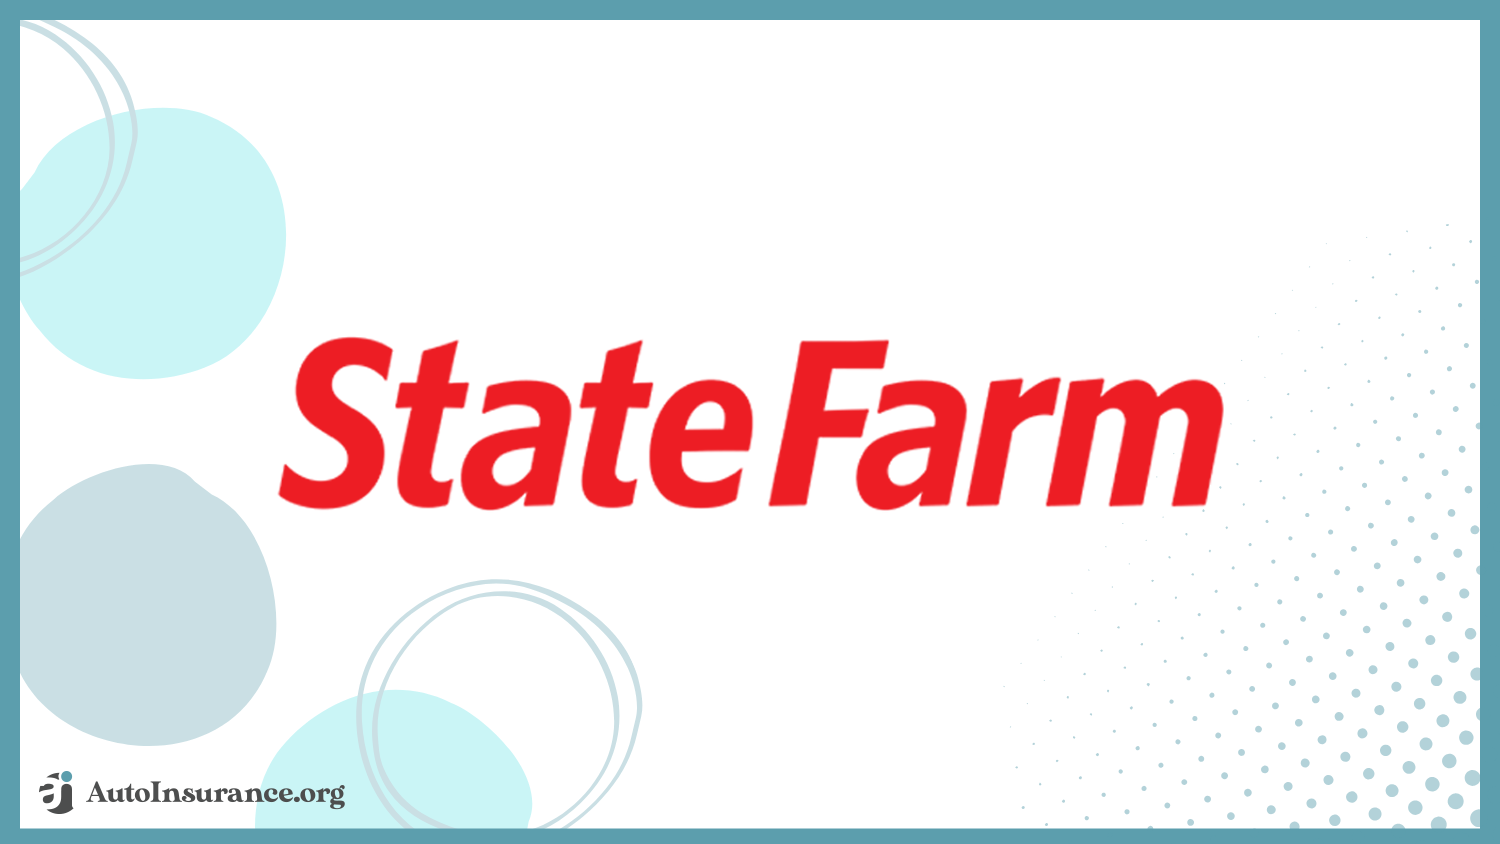 best auto insurance companies for roadside assistance: State Farm